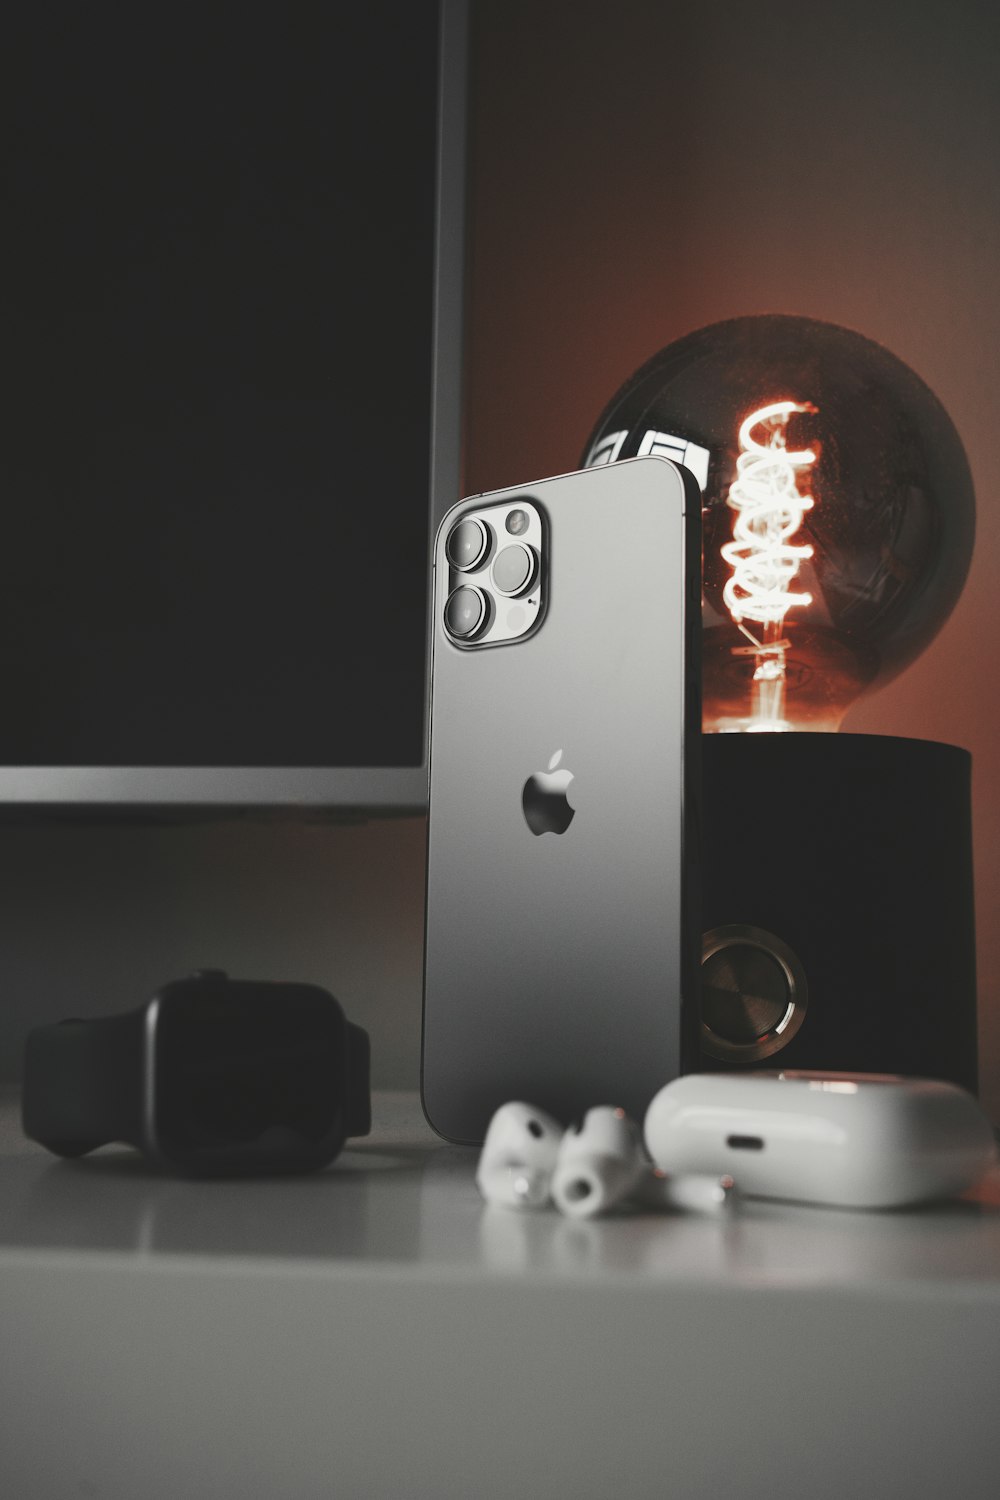 silver iphone 6 beside black and white portable speaker